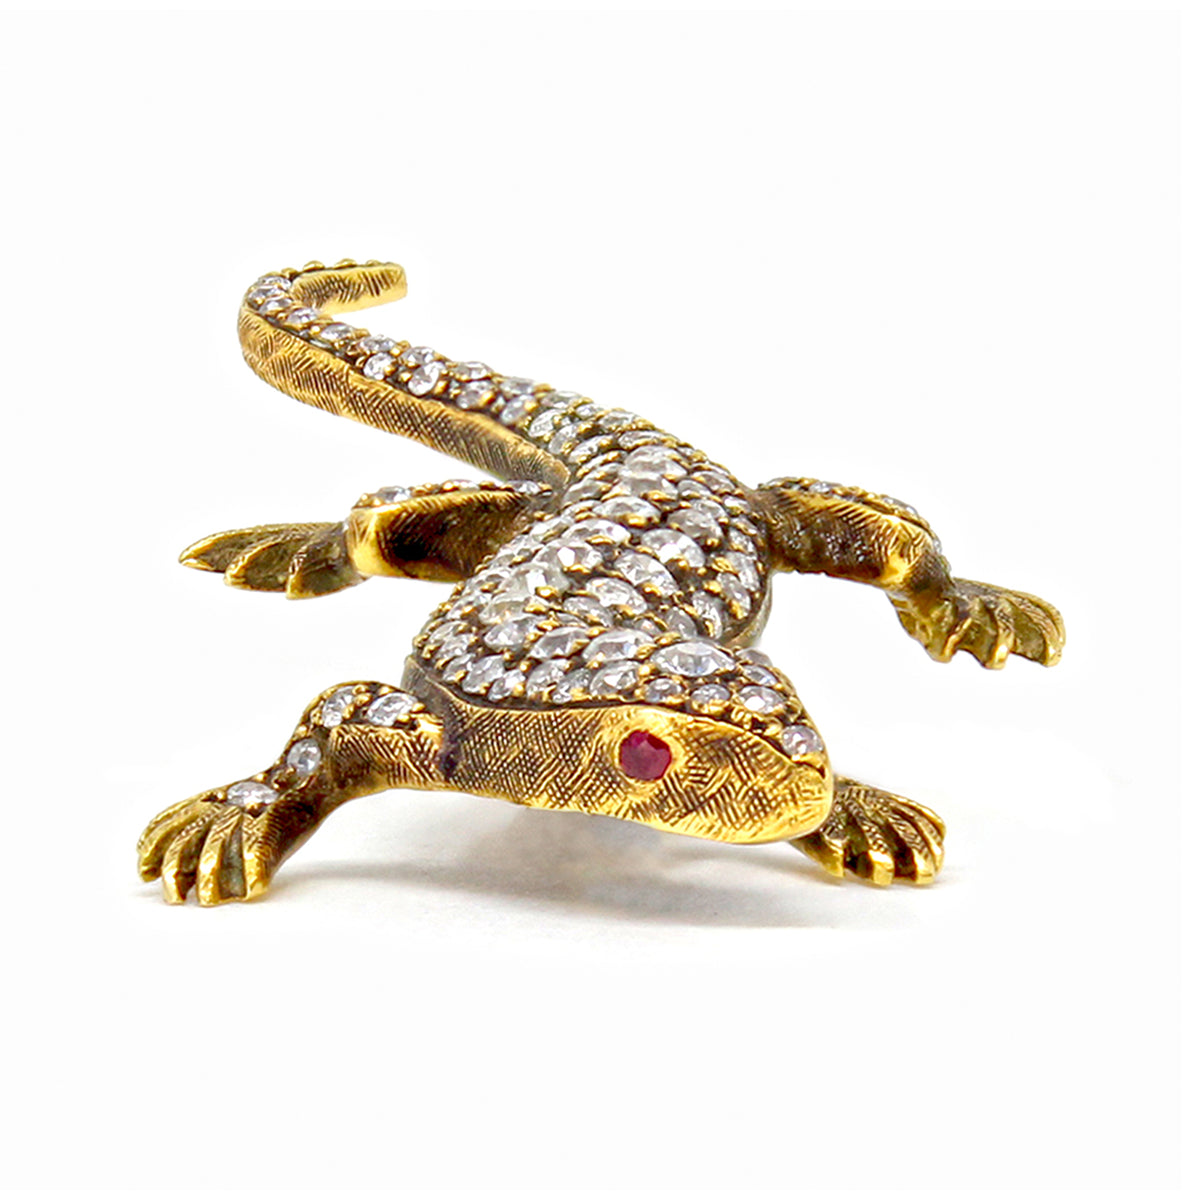 1960s 18 Karat Yellow Gold Gecko Brooch with Diamonds and Rubies front view